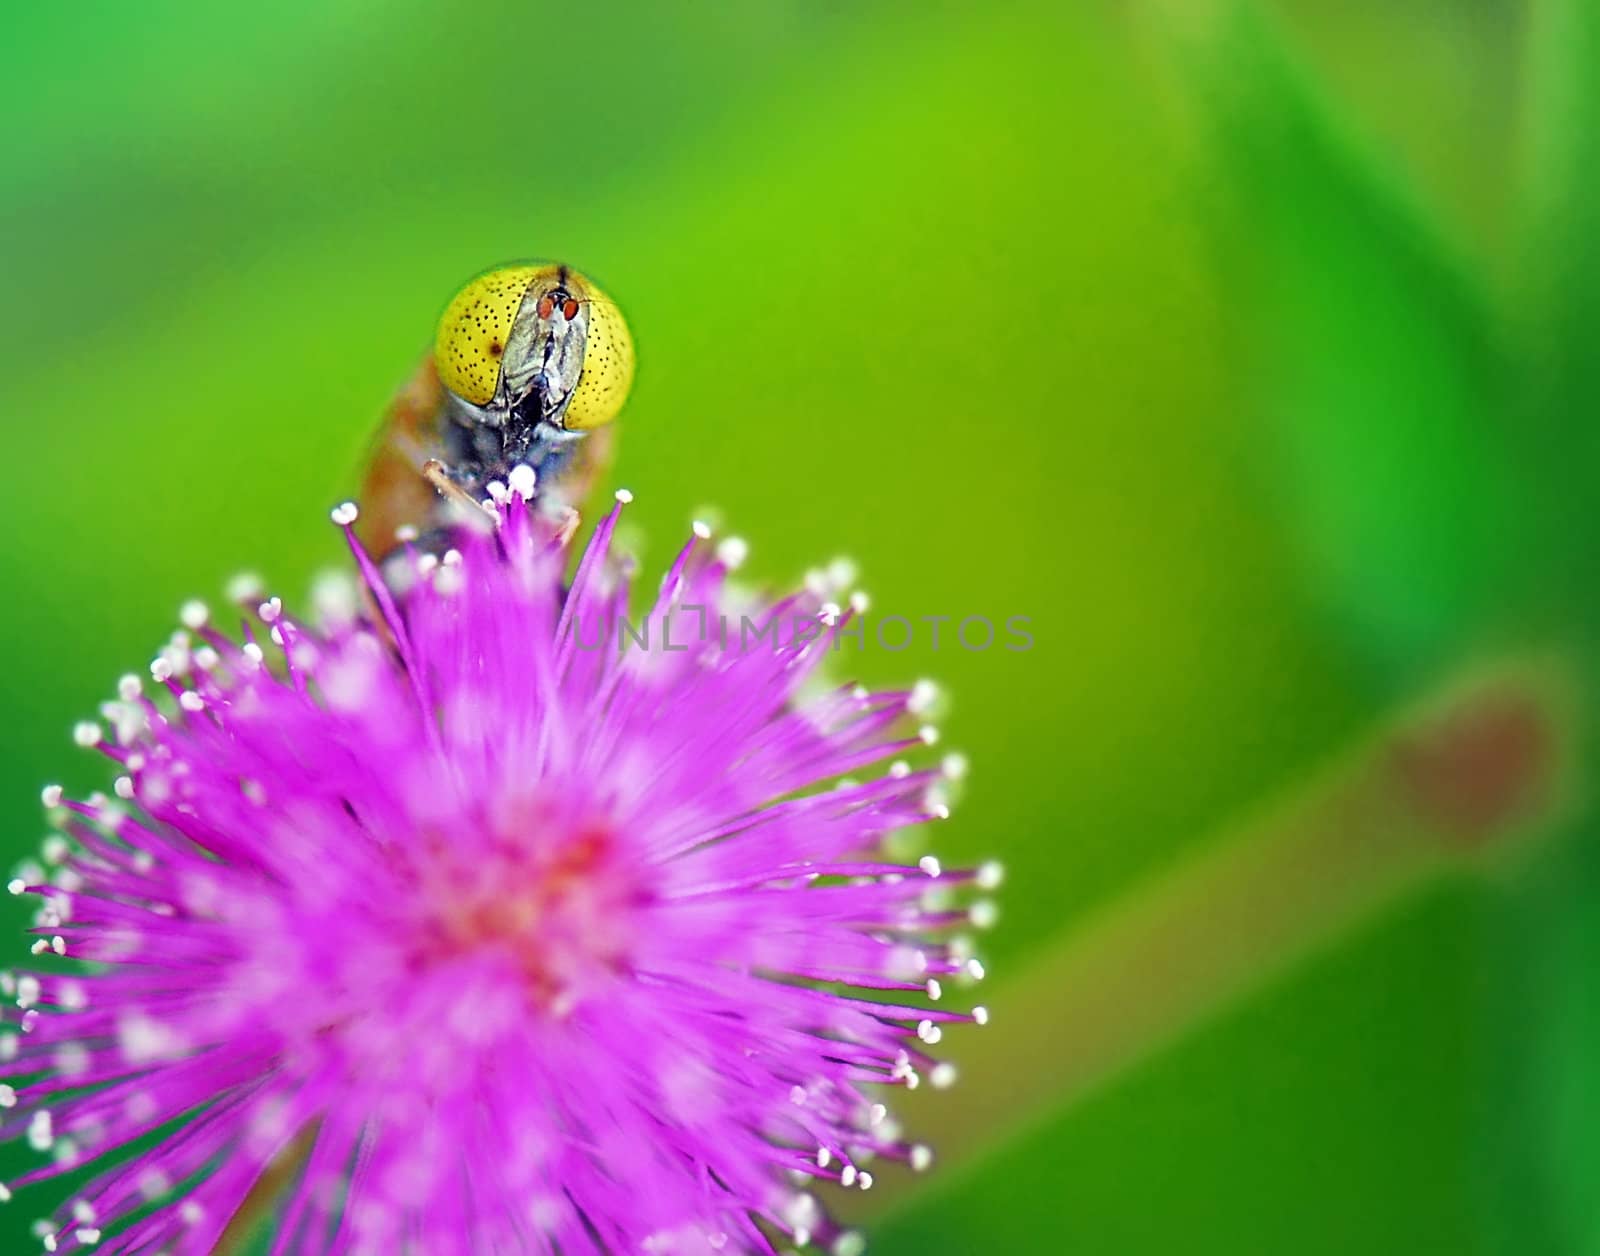 Bees and mimosa by xfdly5